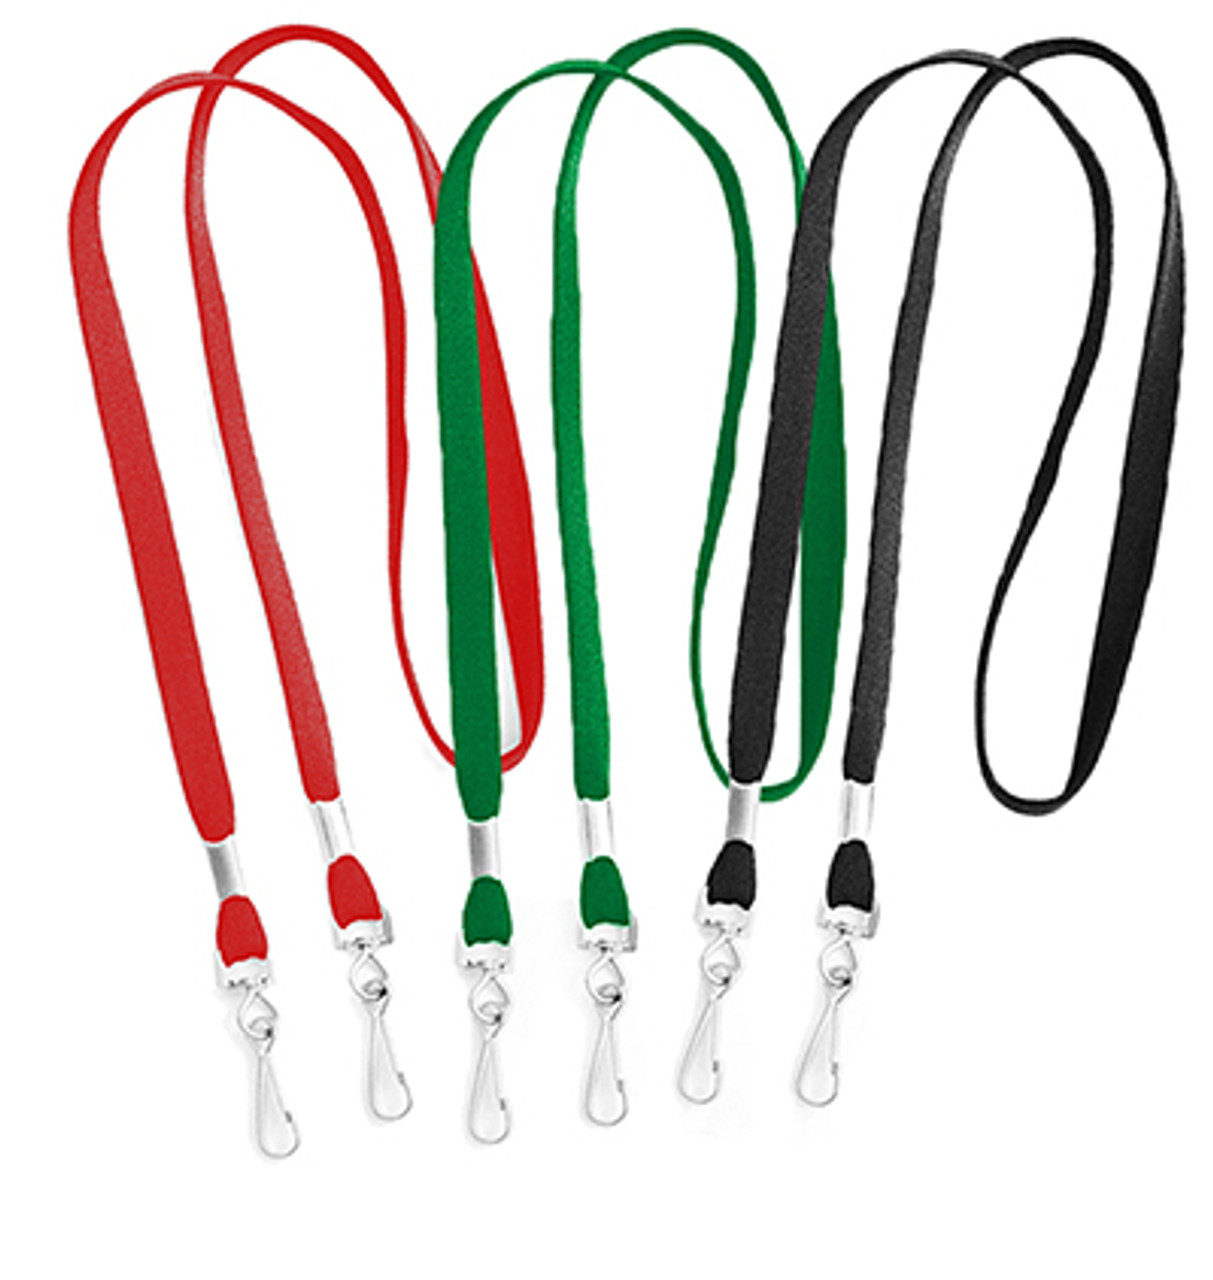 Thin Cord Open Ended Lanyard for Badge, J-Hooks